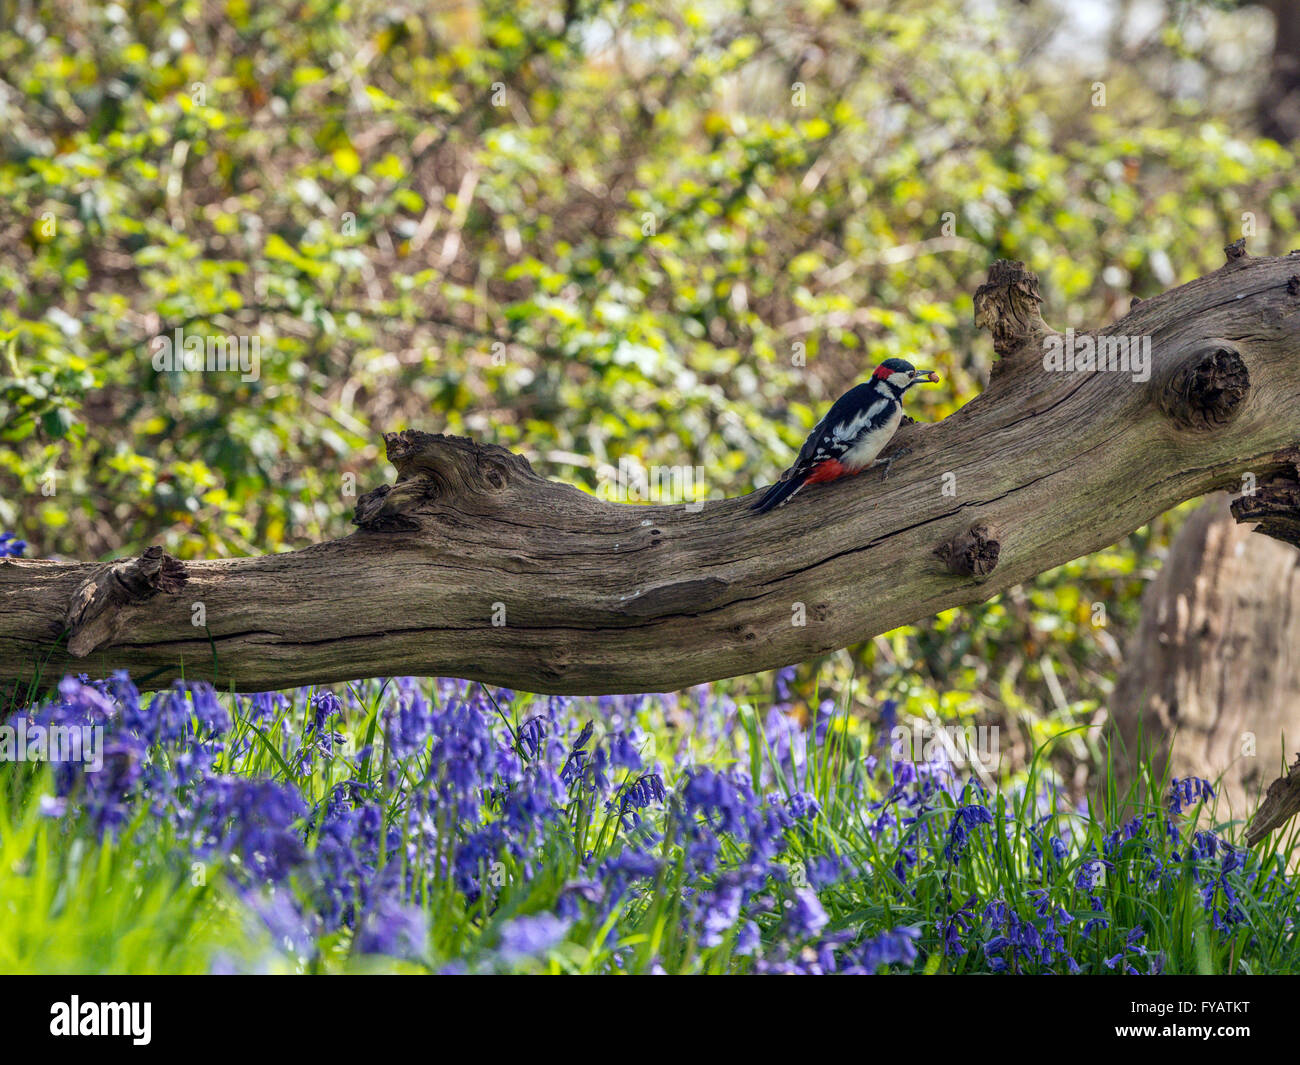 Great Spotted Woodpecker (Dendrocopos major) foraging in natural woodland setting., surrounded by Blue Bells Stock Photo